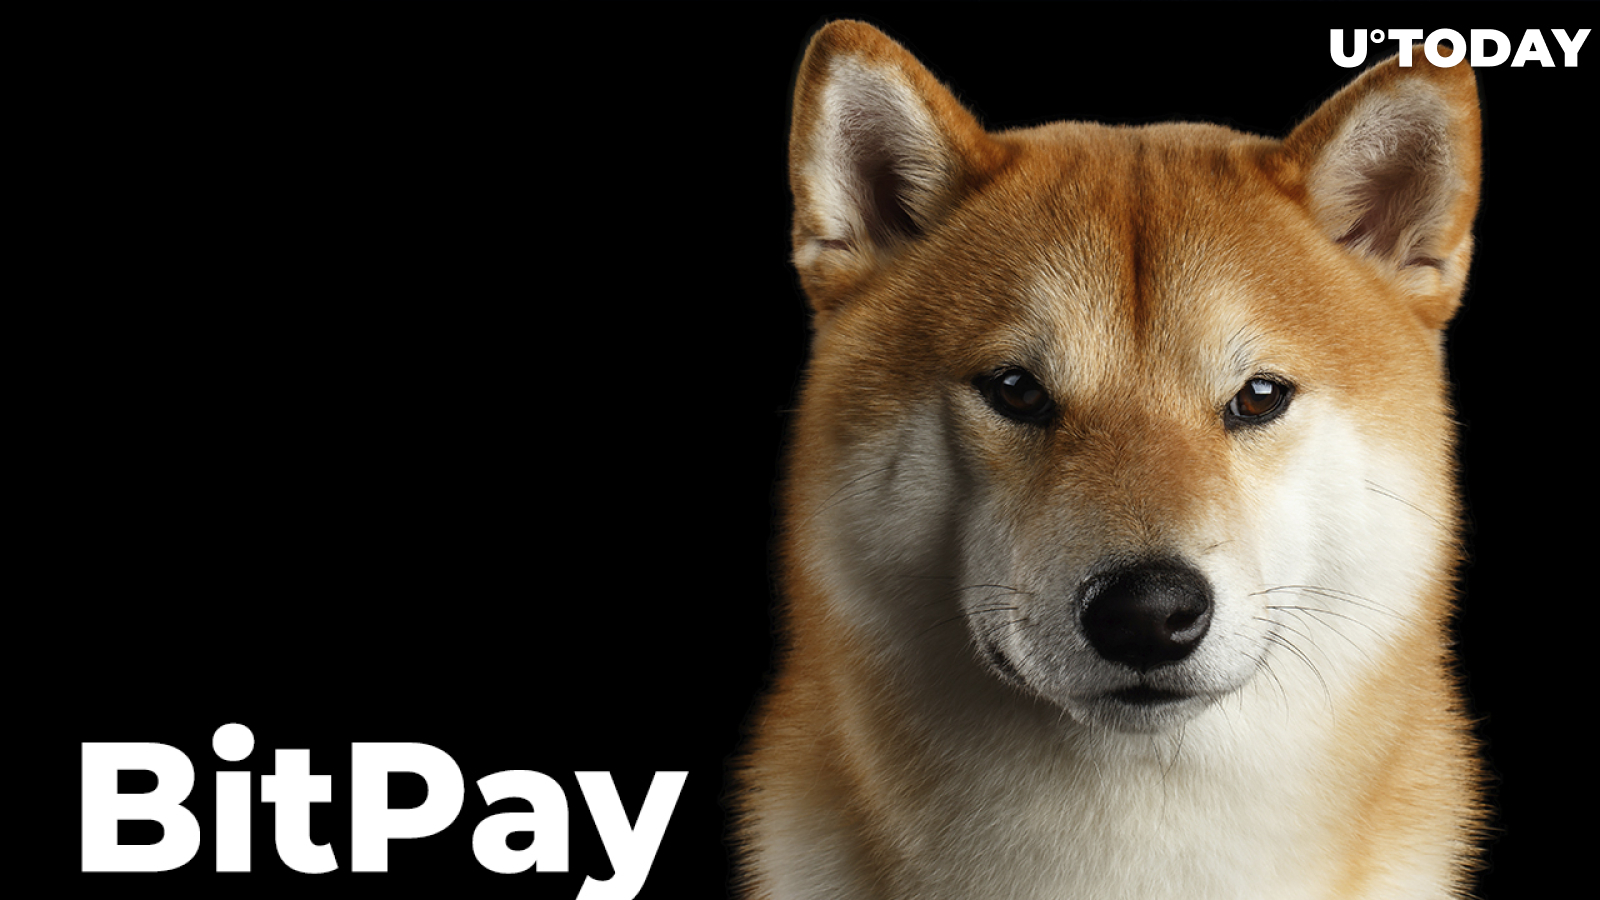 Shiba Inu and Dogecoin Now Accepted by U.S.-Based Logistics Firm in Partnership with BitPay: Details